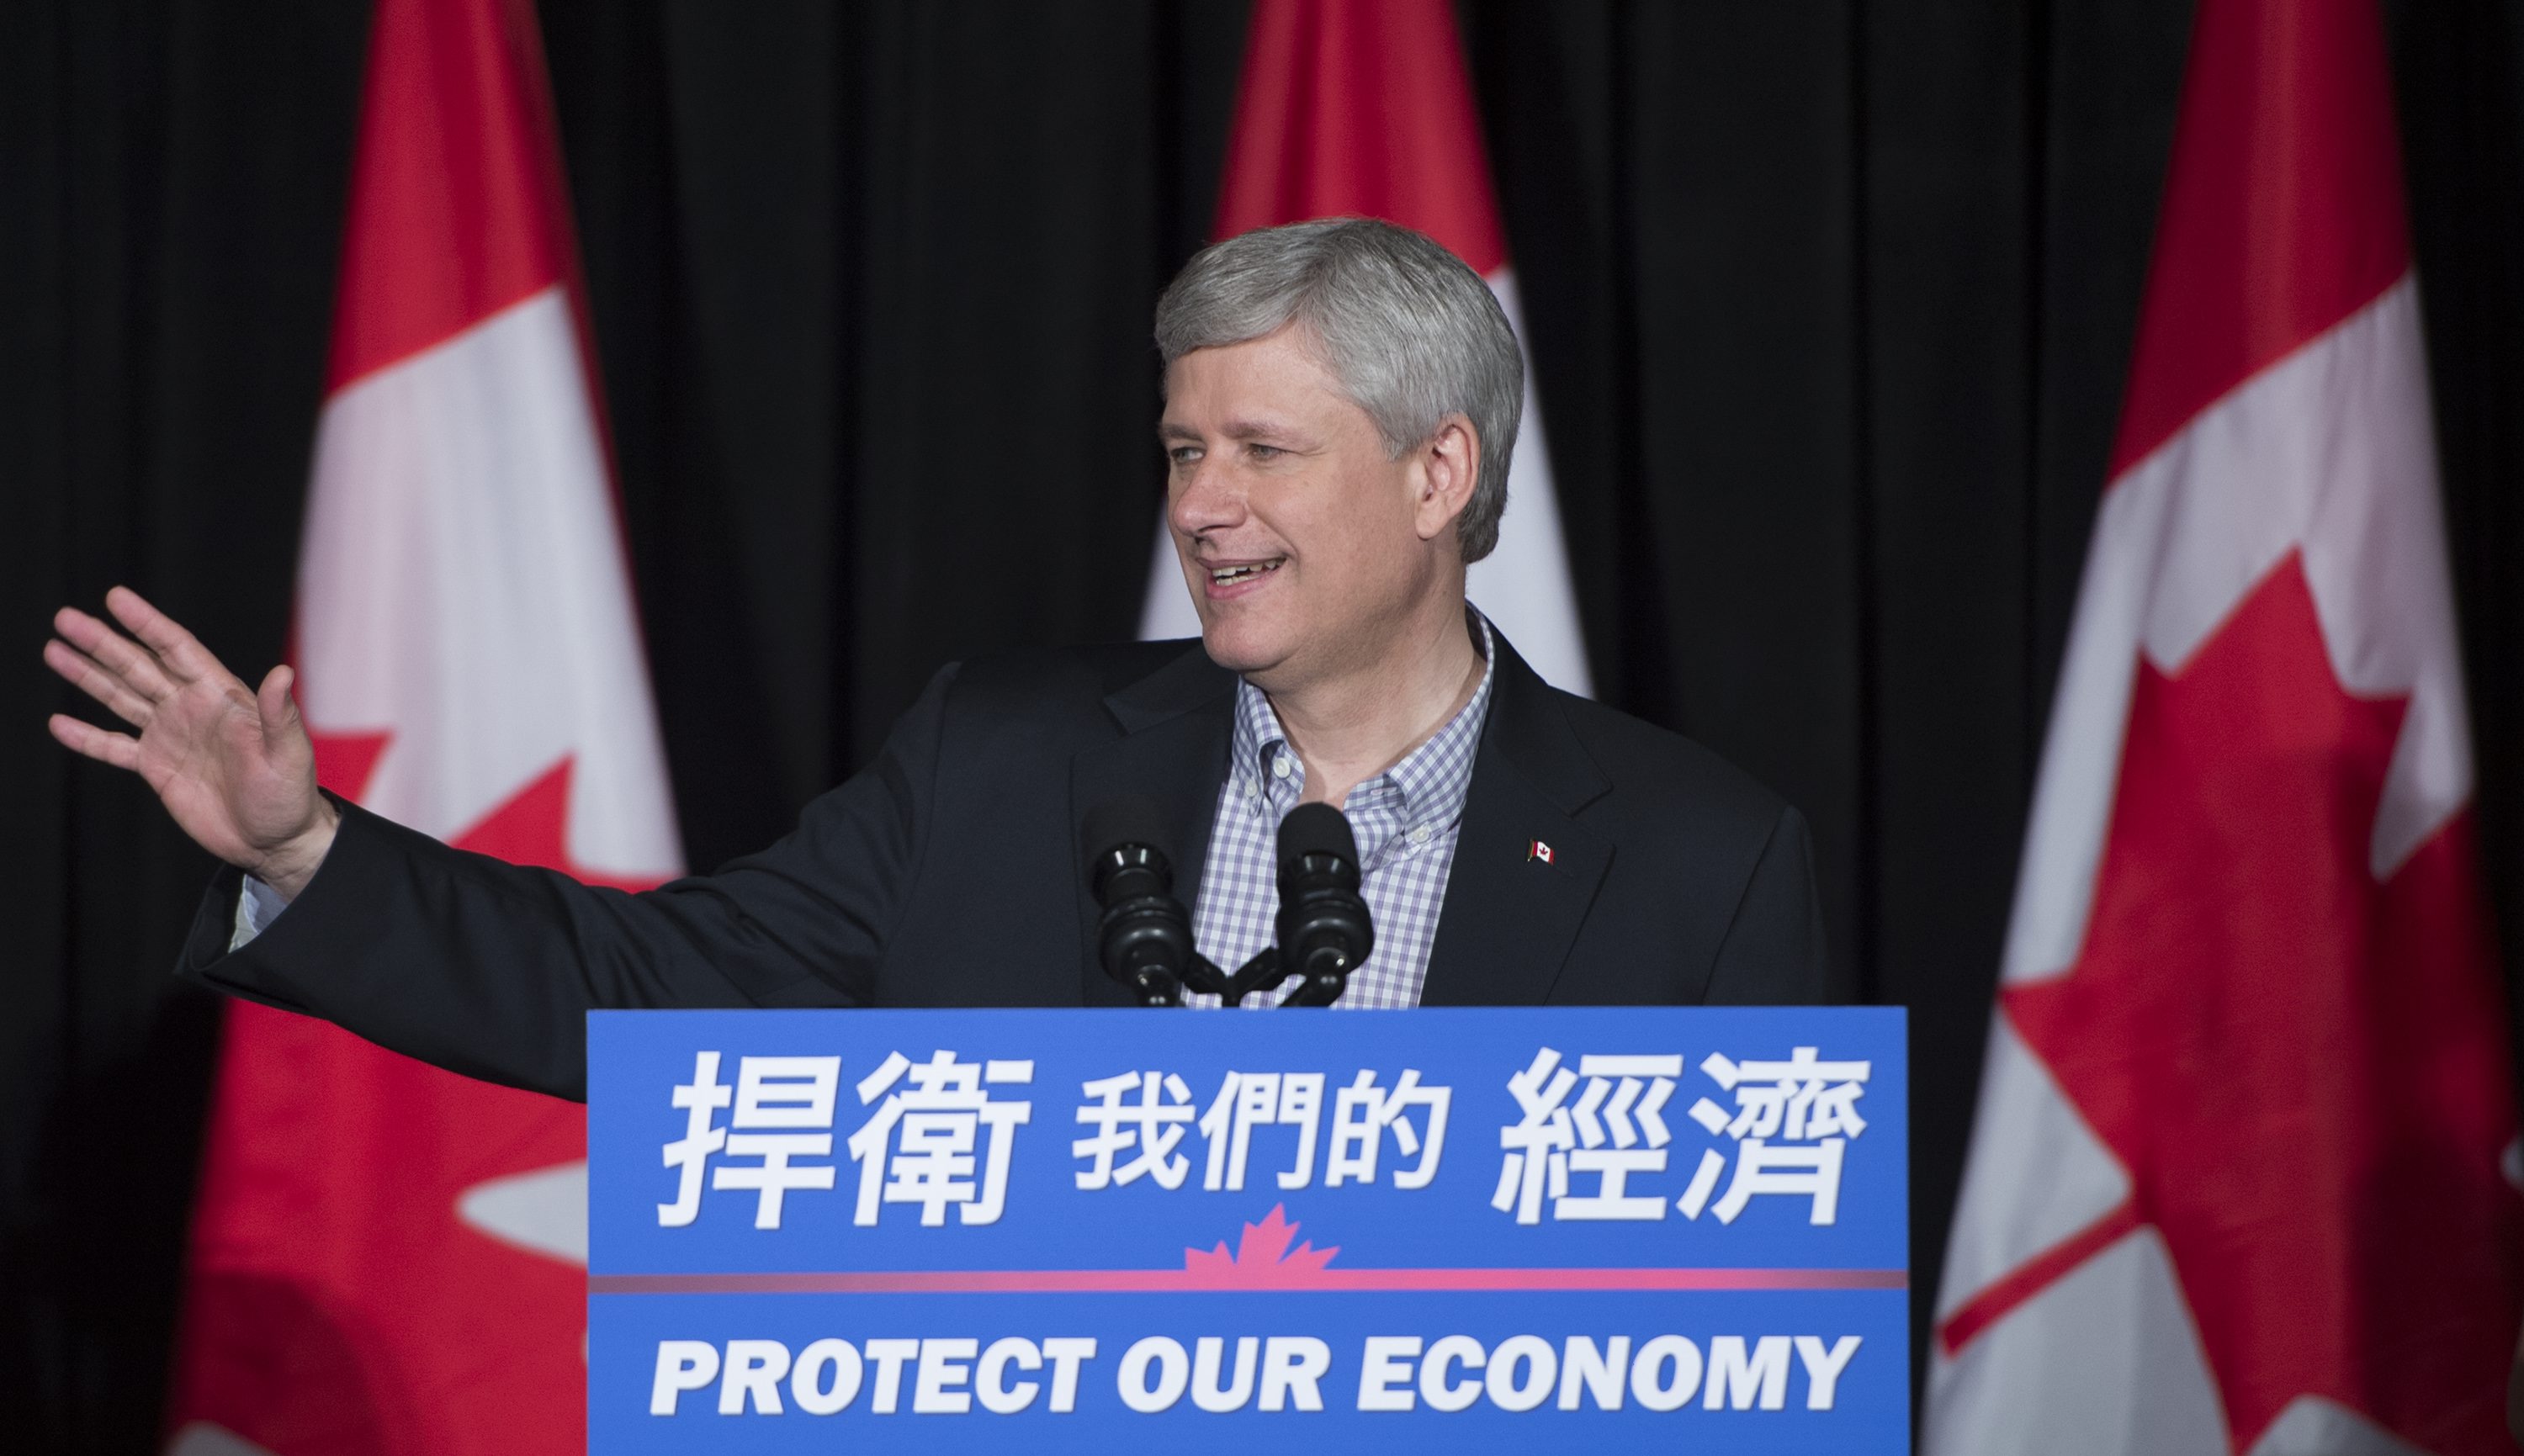 Conservative leader Stephen Harper waves to the crowd after addressing a gathering during an election campaign stop in Vancouver, British Columbia, Thursday, Oct. 8, 2015. (Jonathan Hayward /The Canadian Press via AP) MANDATORY CREDIT